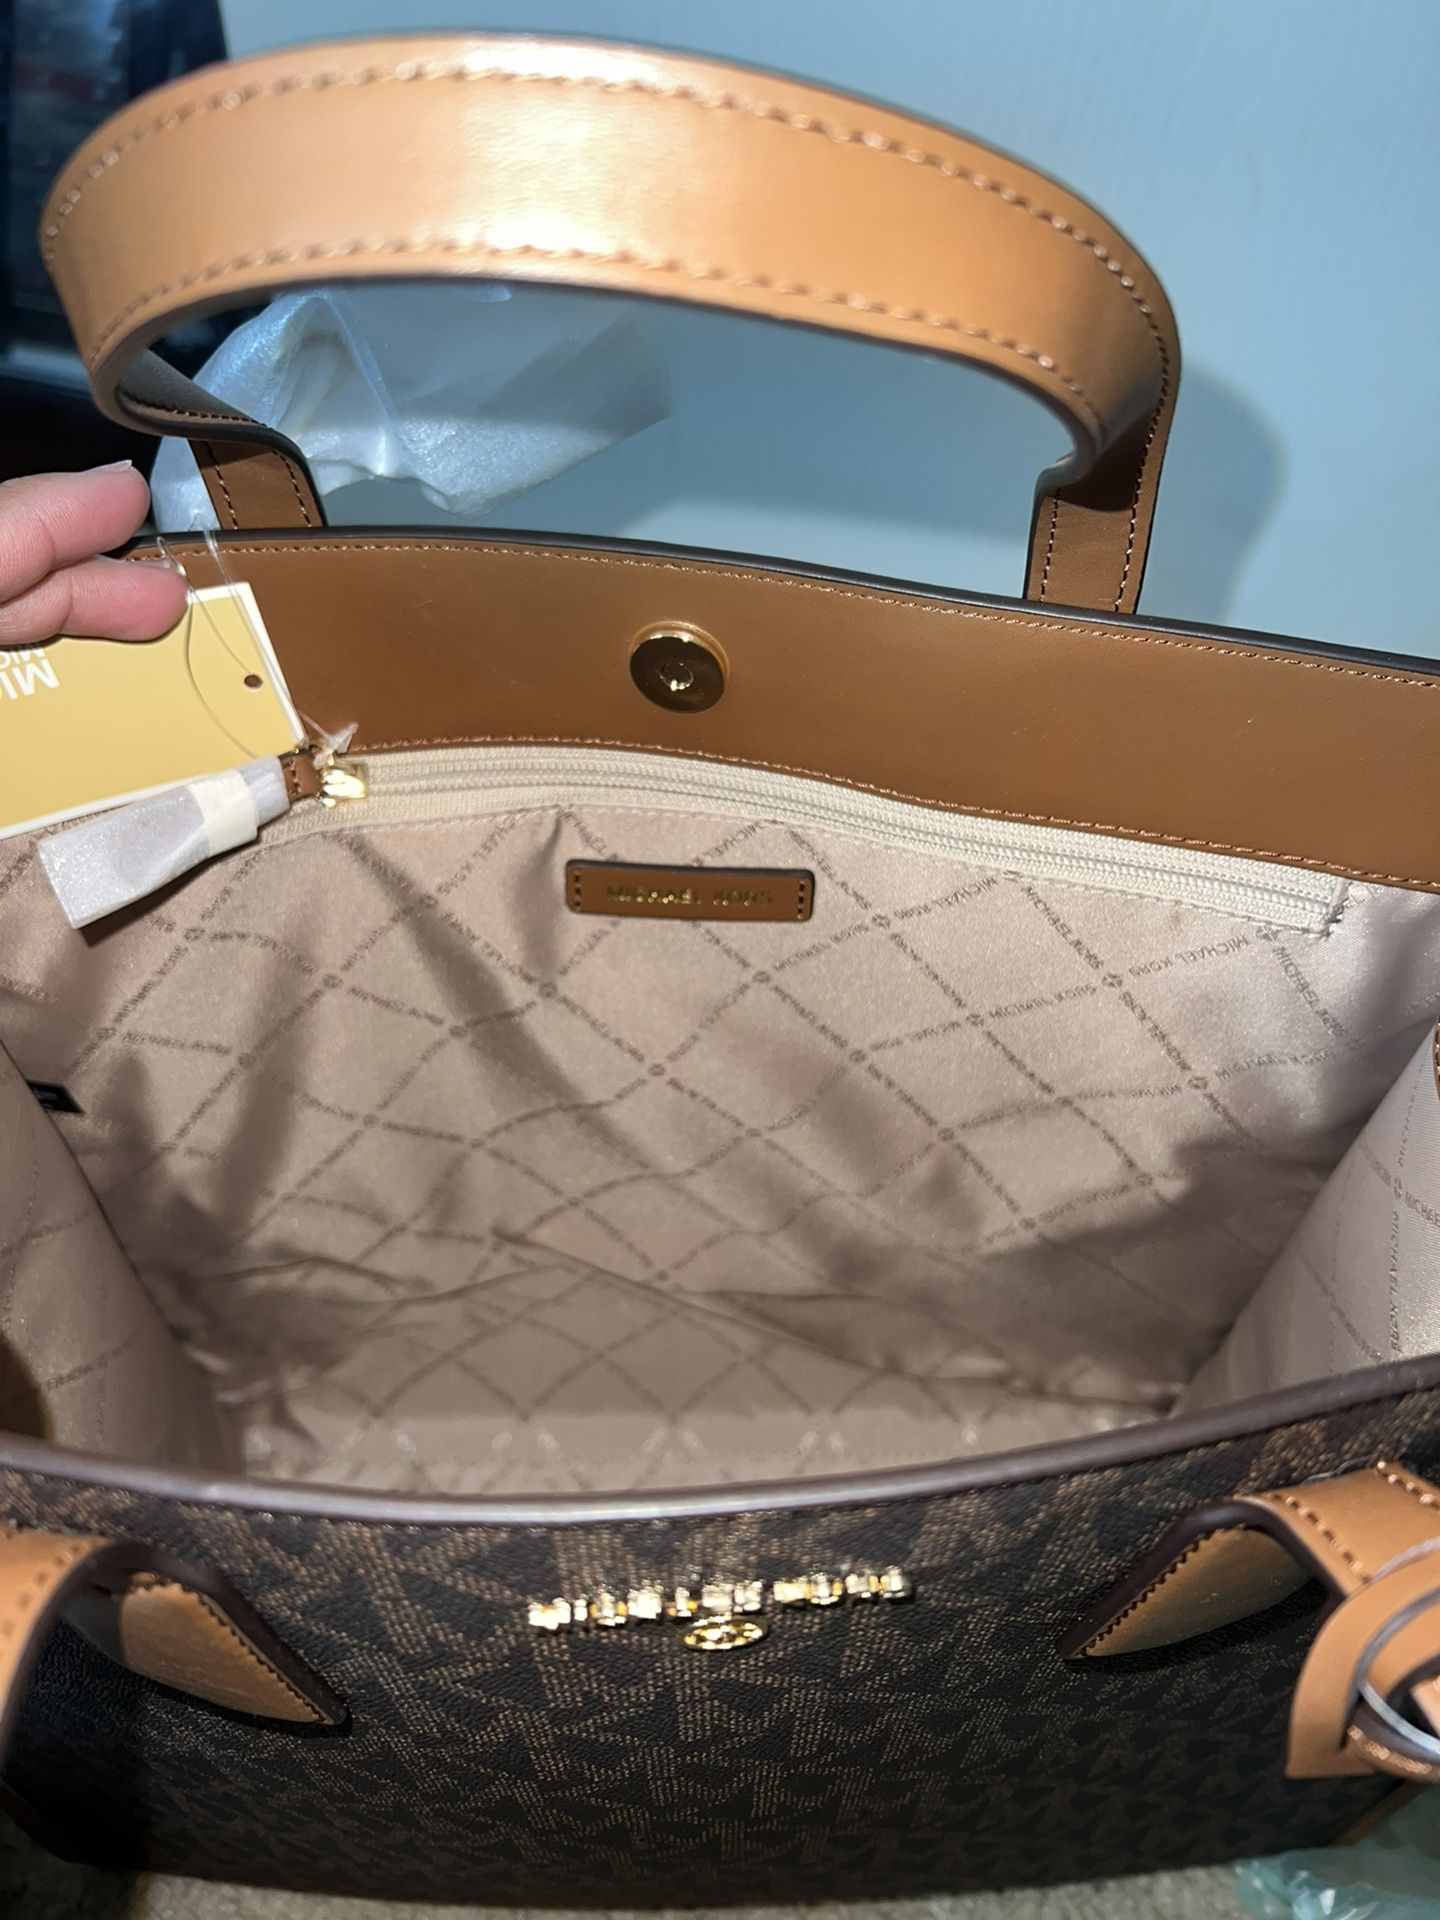 Michael Kors 3 In 1 Kimberly Tote for Sale in Denton, TX - OfferUp